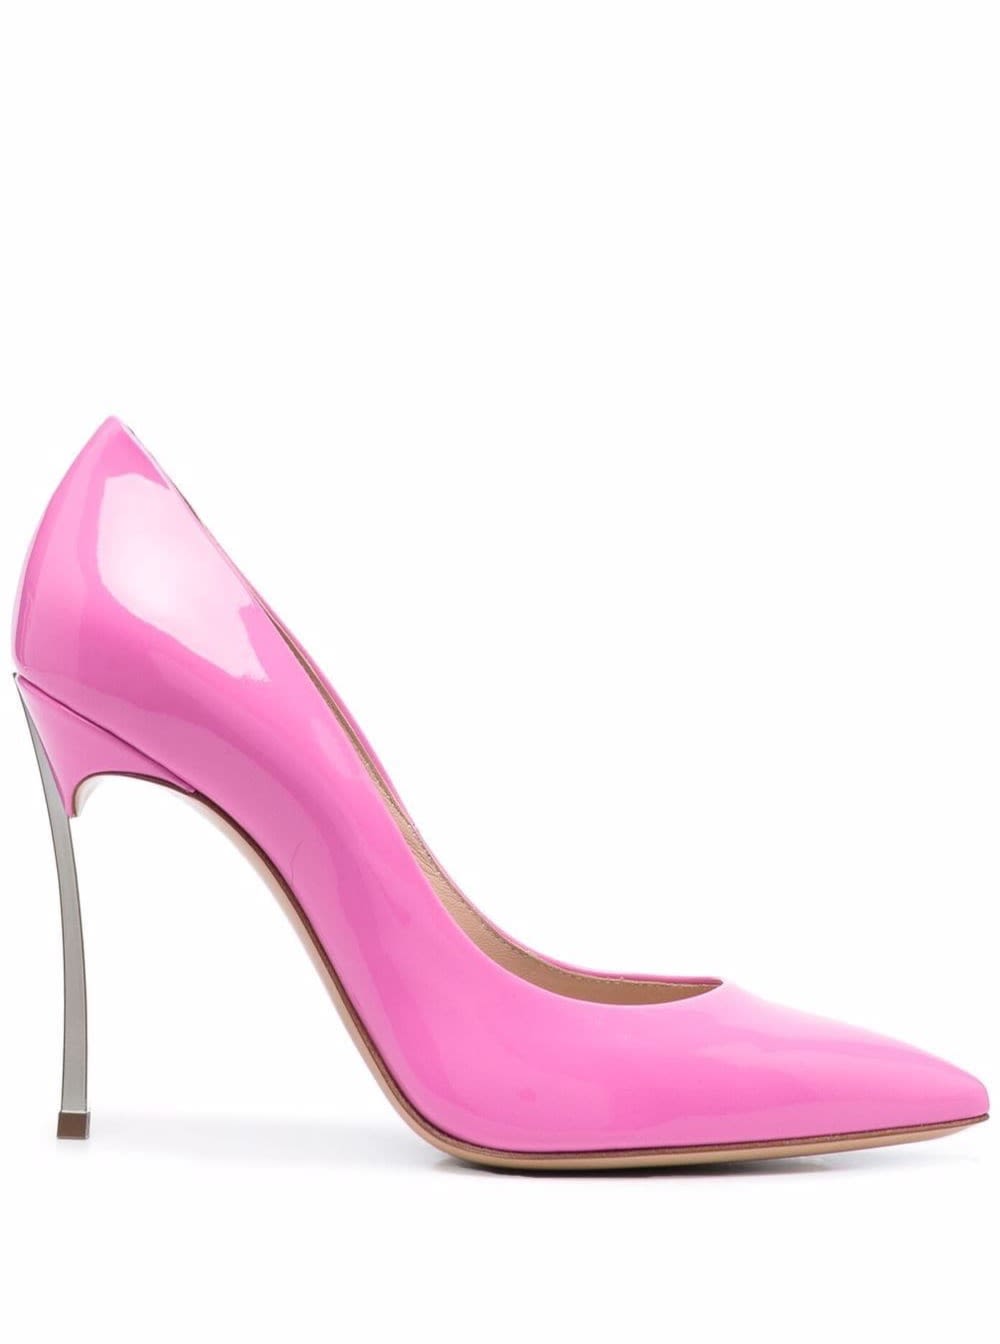 Casadei Womans Blade Tiffany Pink Leather Pumps